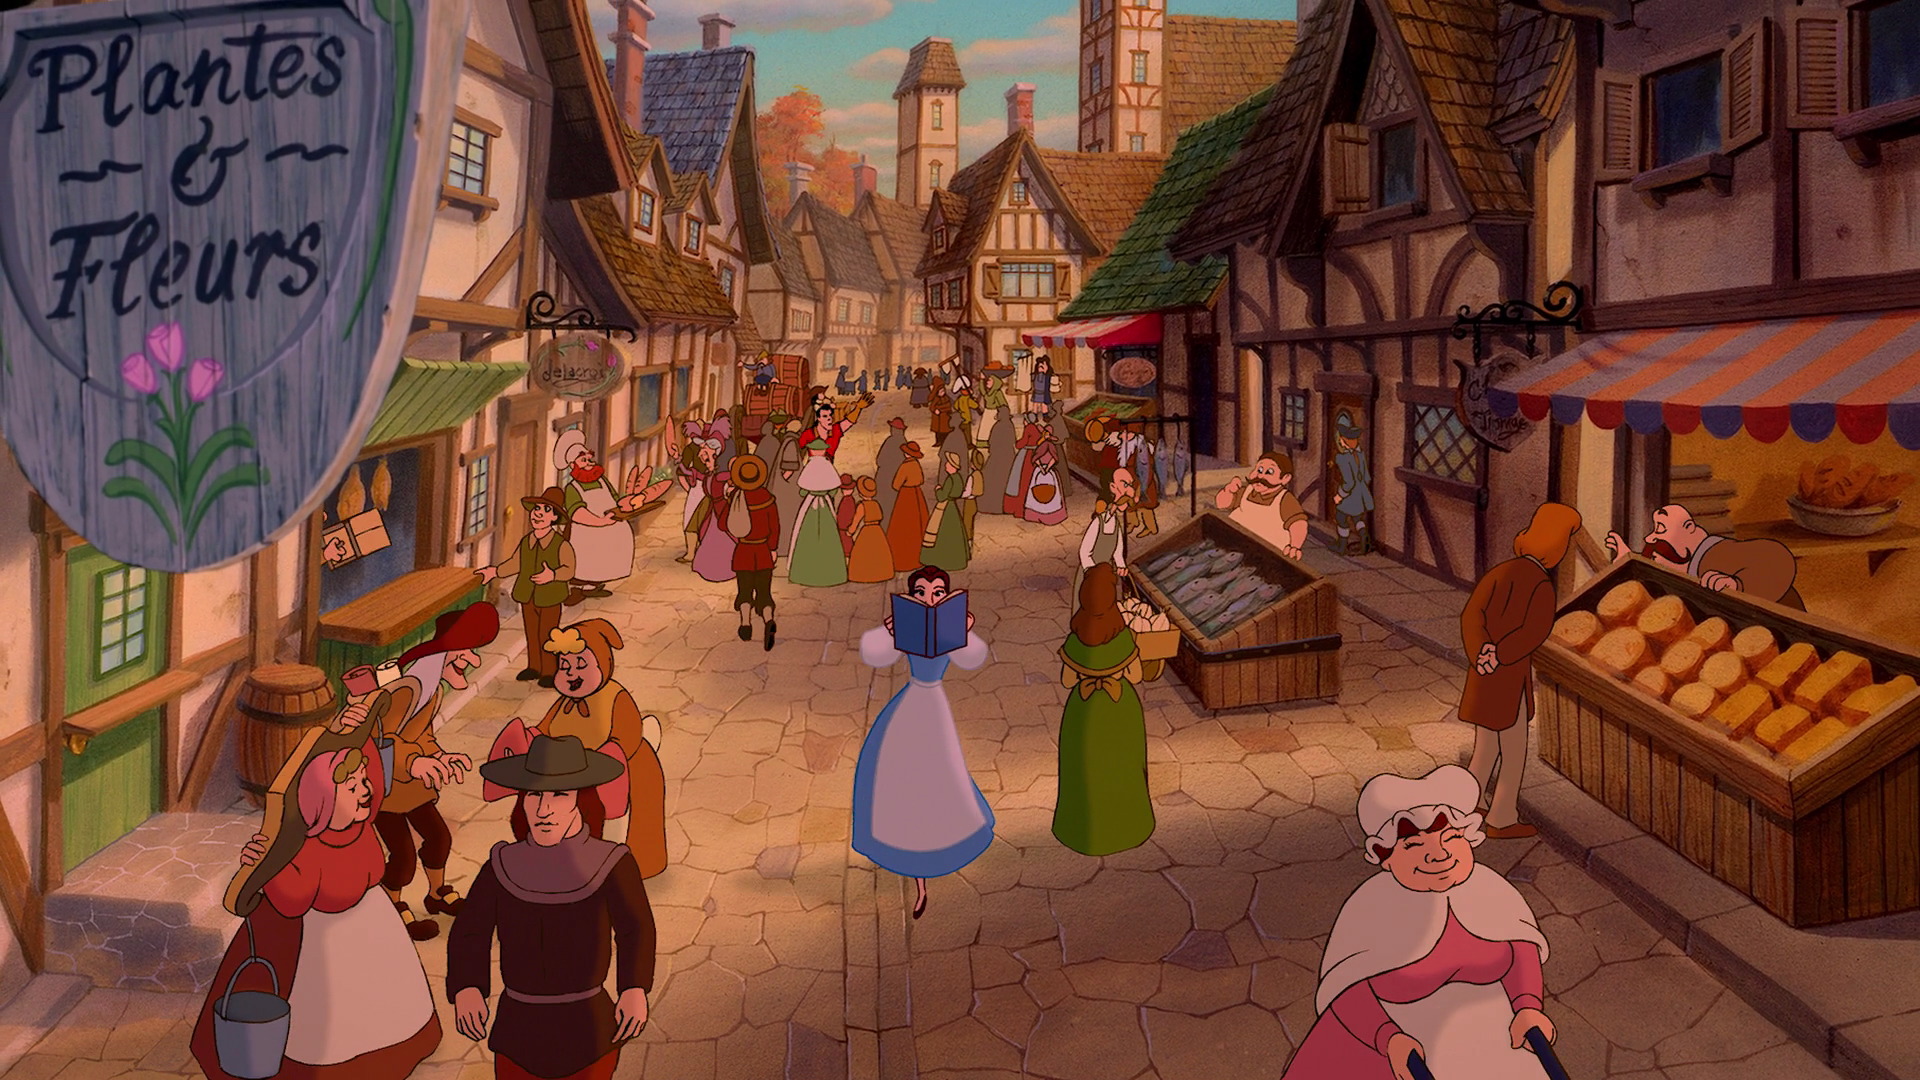 http://img3.wikia.nocookie.net/__cb20140319184413/disney/images/8/8b/Beauty_and_the_Beast_Village.jpg